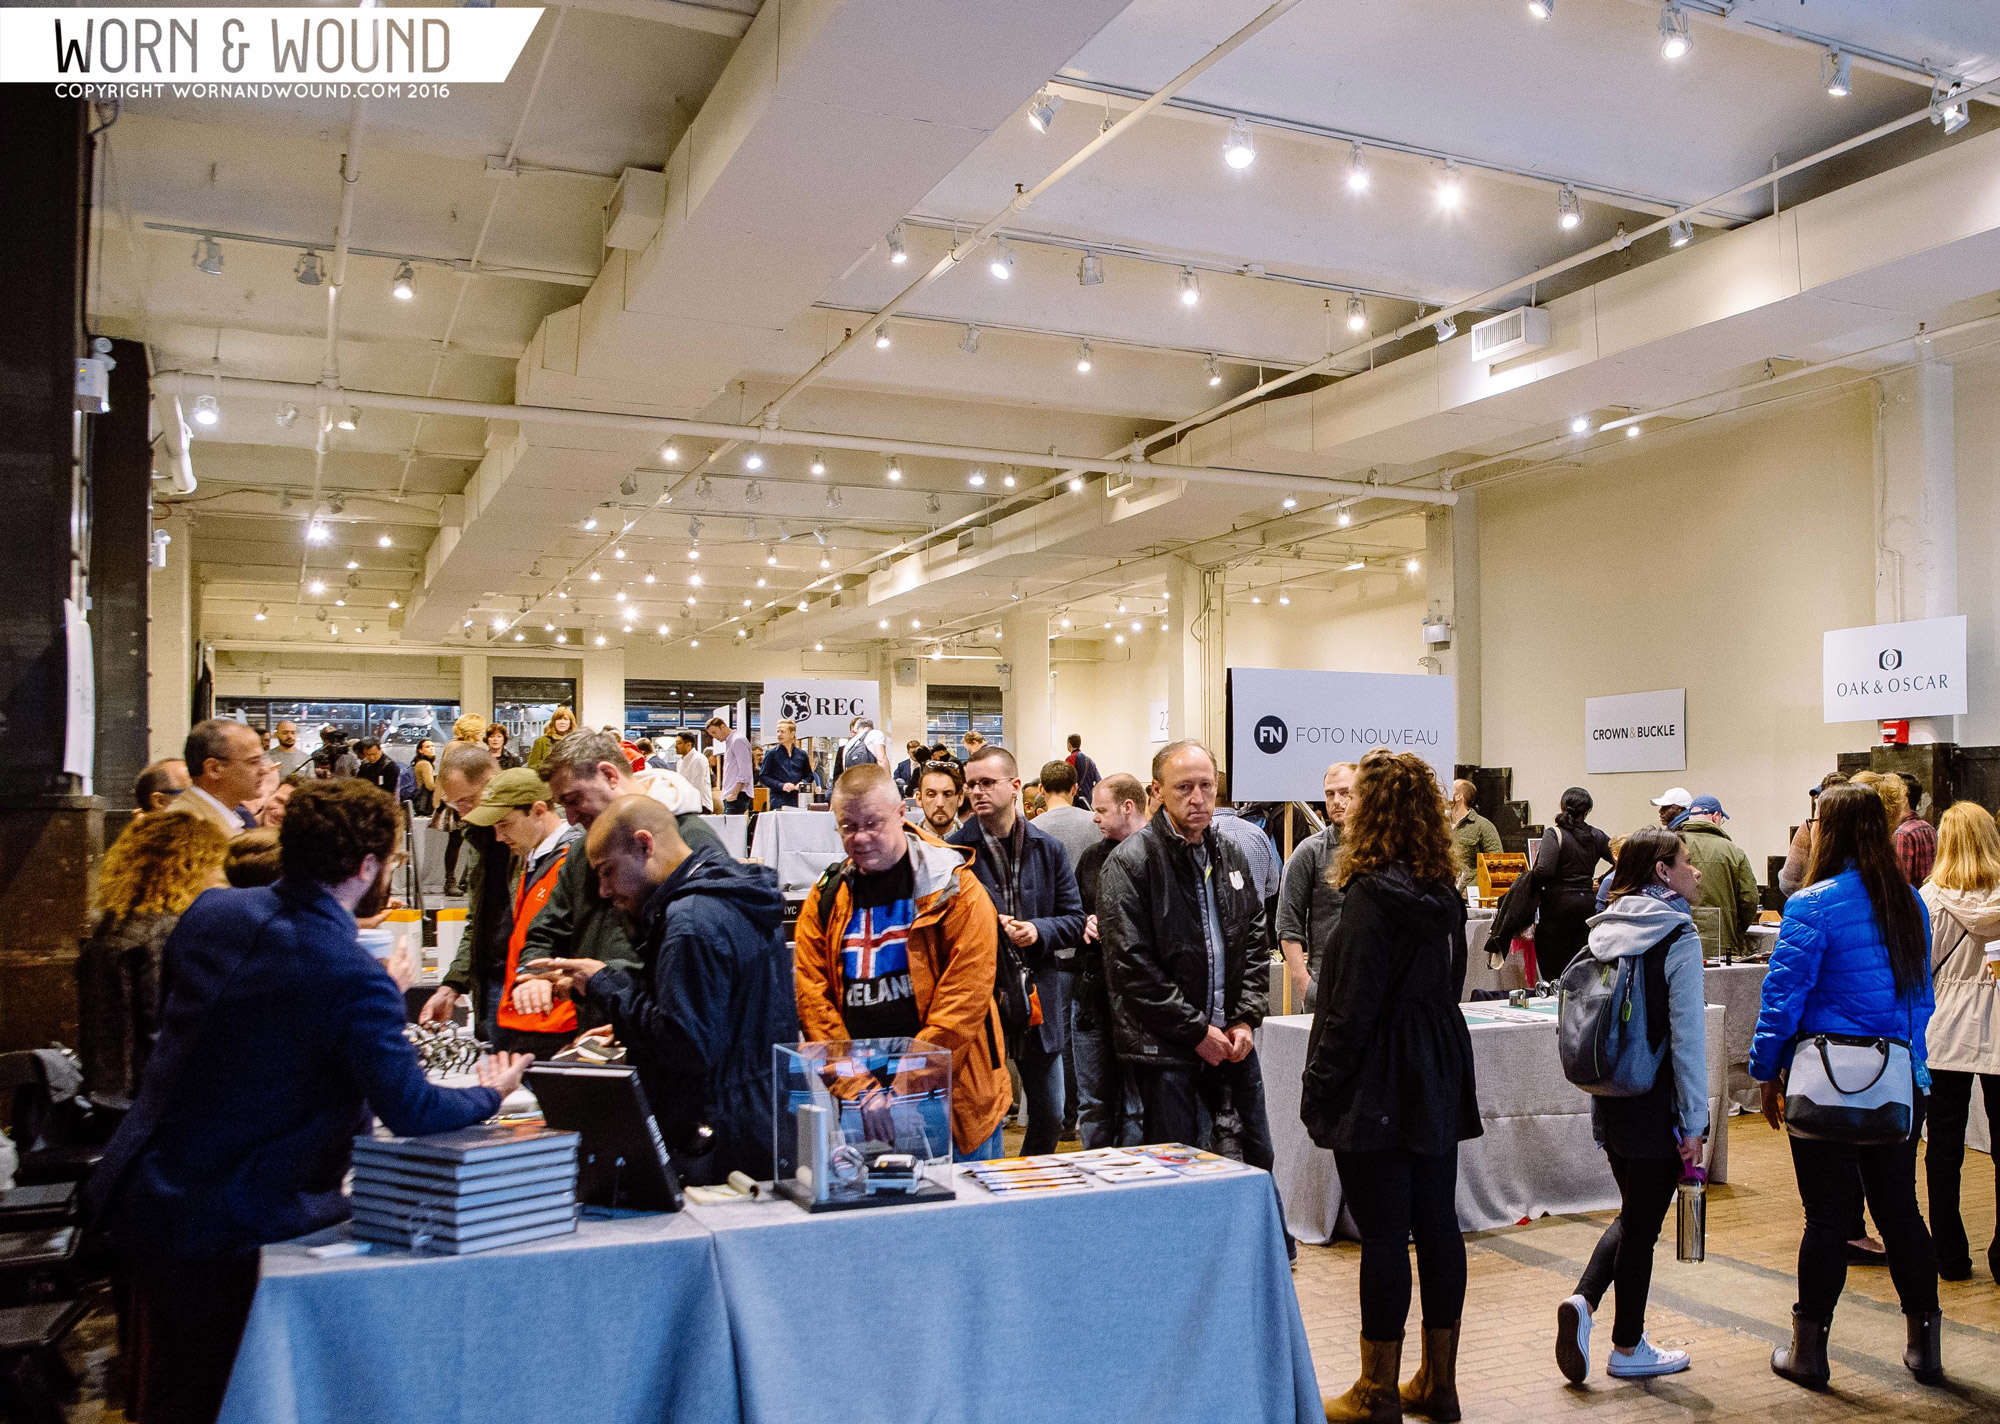 Event Reminder: The 2018 NYC Windup Watch Fair Kicks Off This Friday!